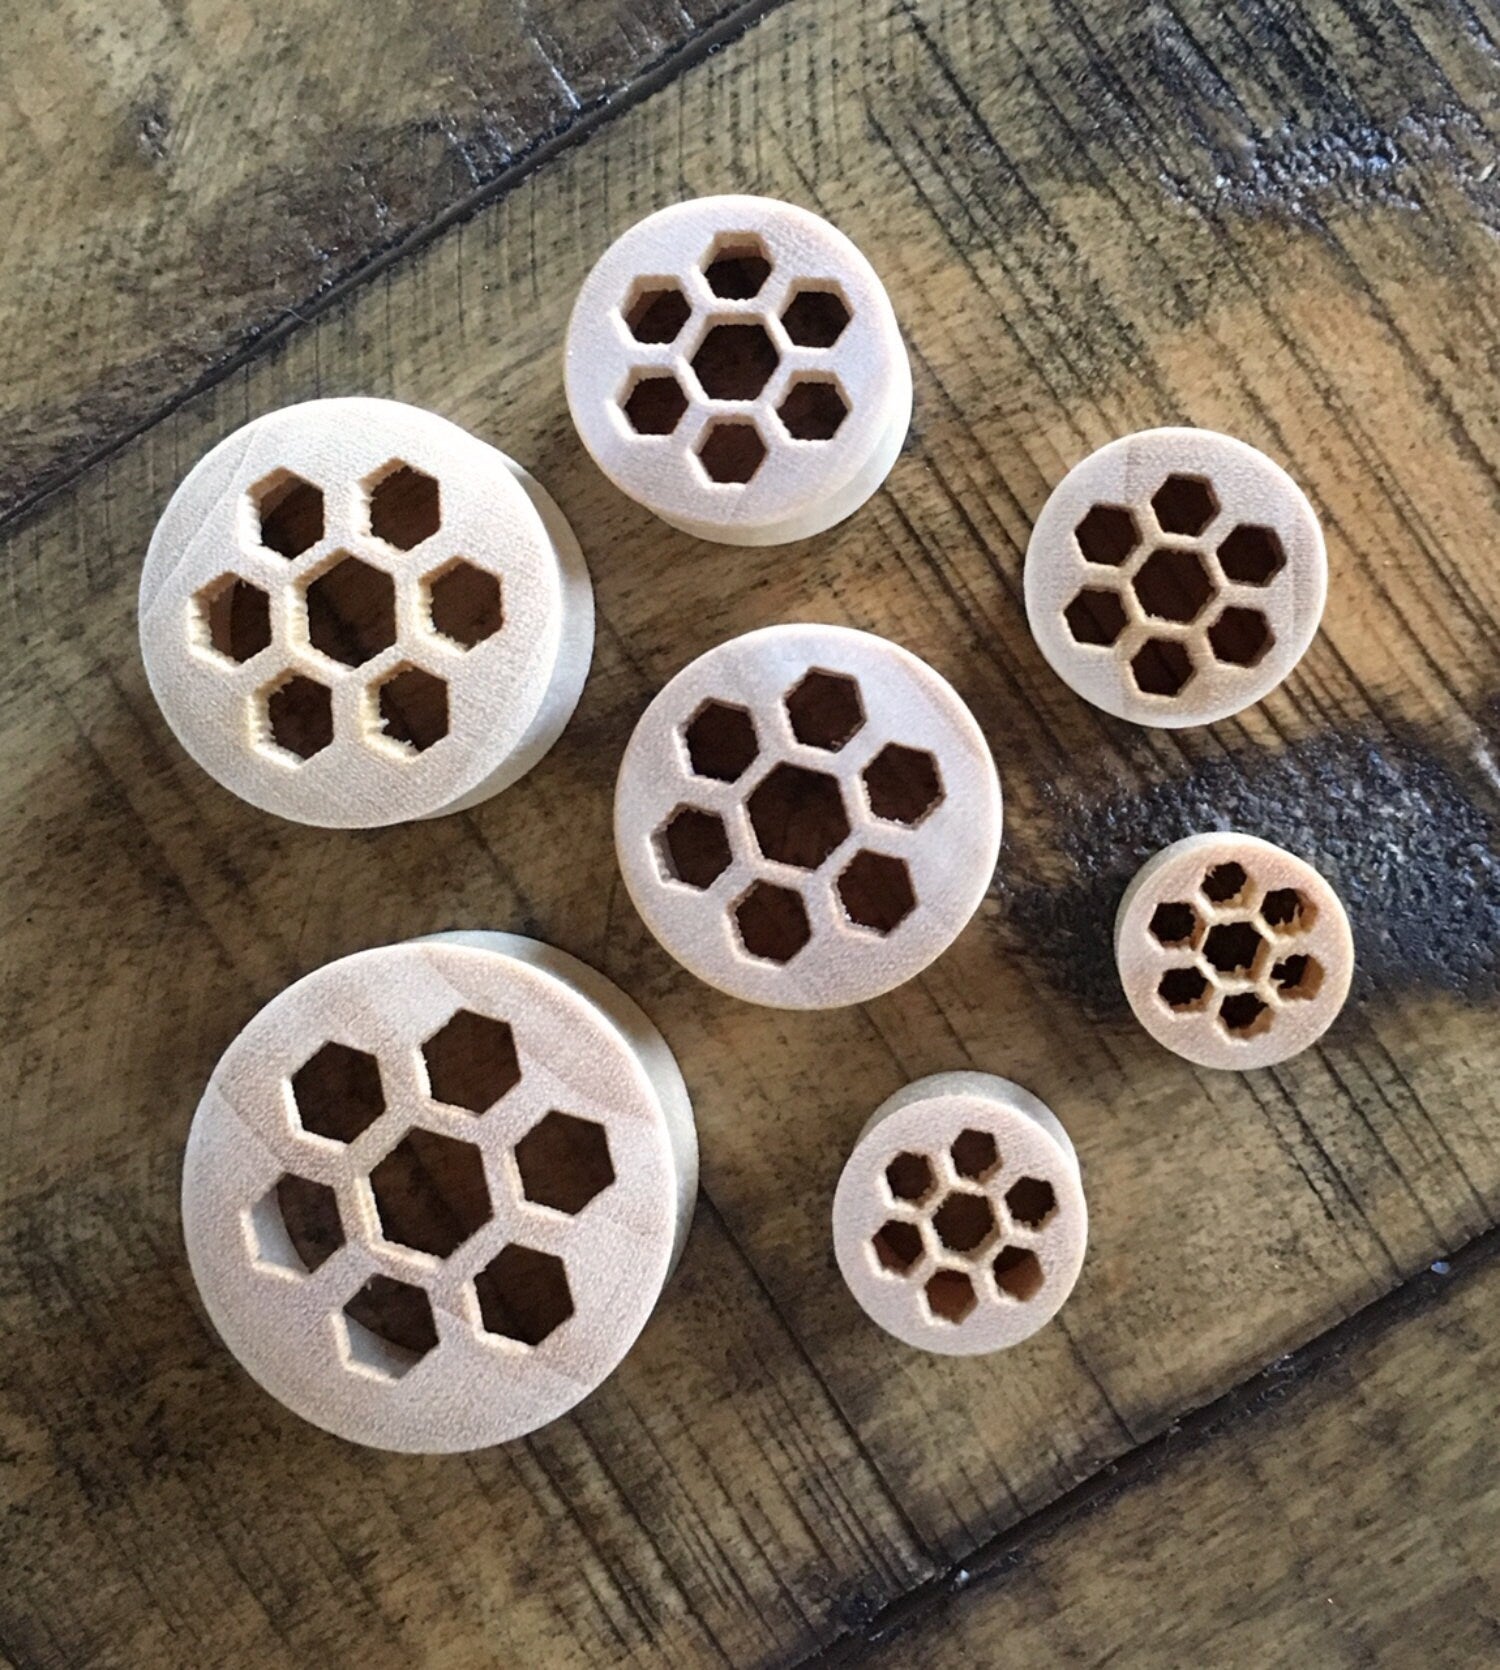 PAIR of Organic Honeycomb Cut Out Blonde Crocodile Wood Saddle Plugs - Gauges 00g (10mm) up to 1" (25mm) available!